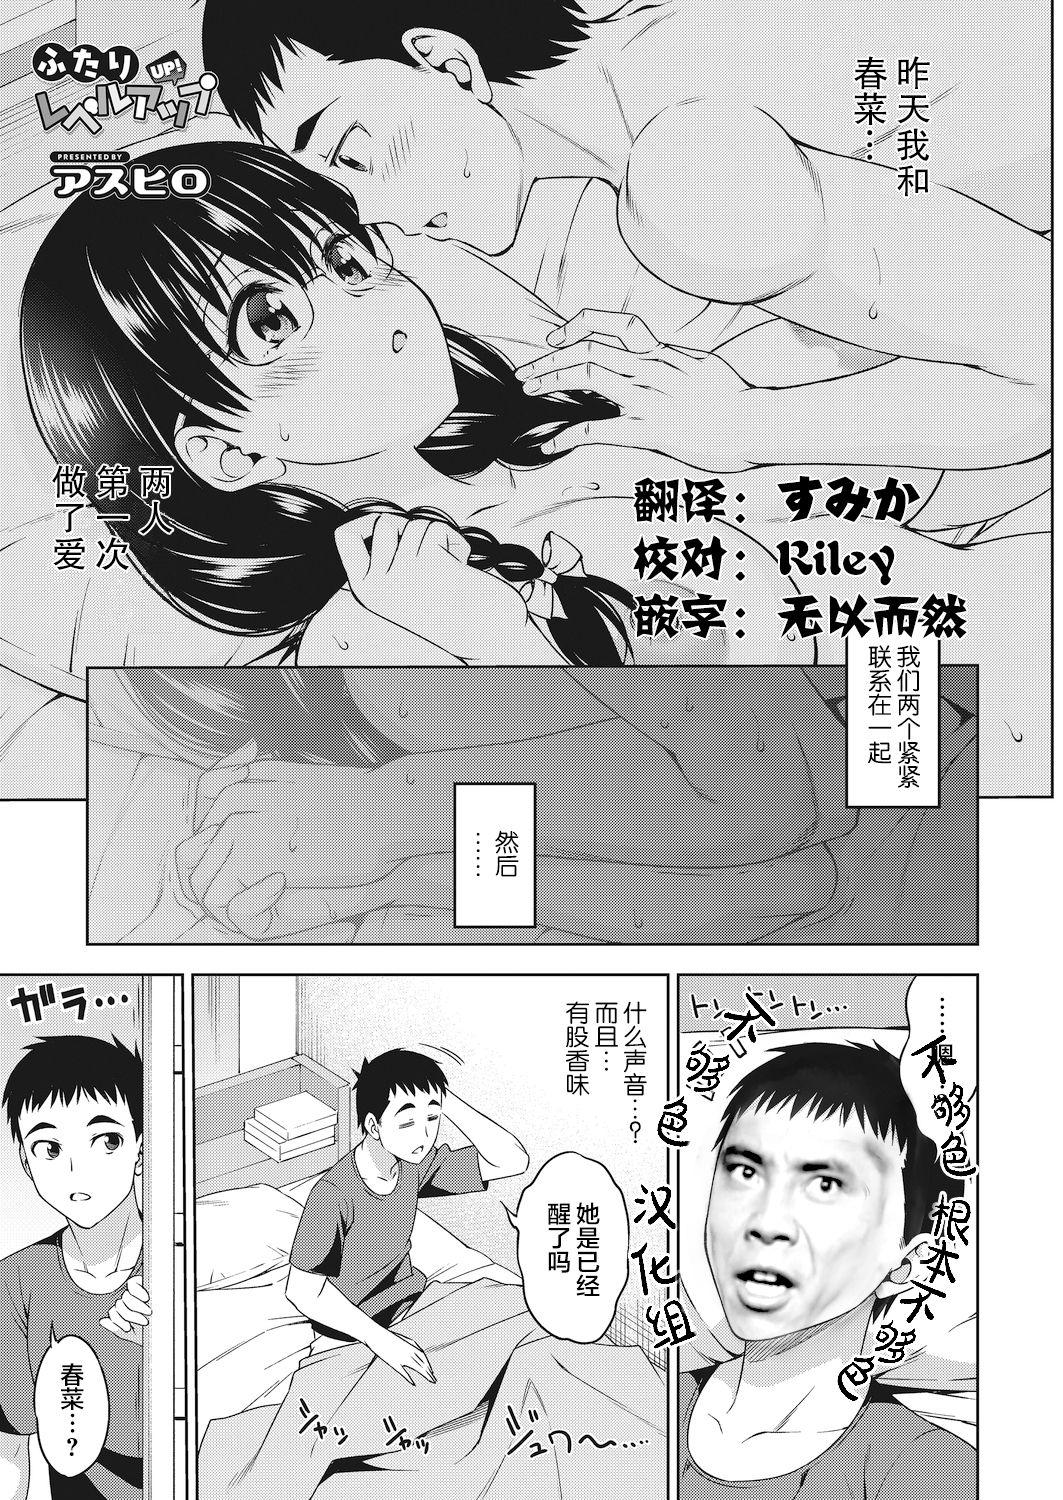 Two Level Up Ashiro (Comic Hot Milk, May 2021) Chinese translation DL version (23 pages)